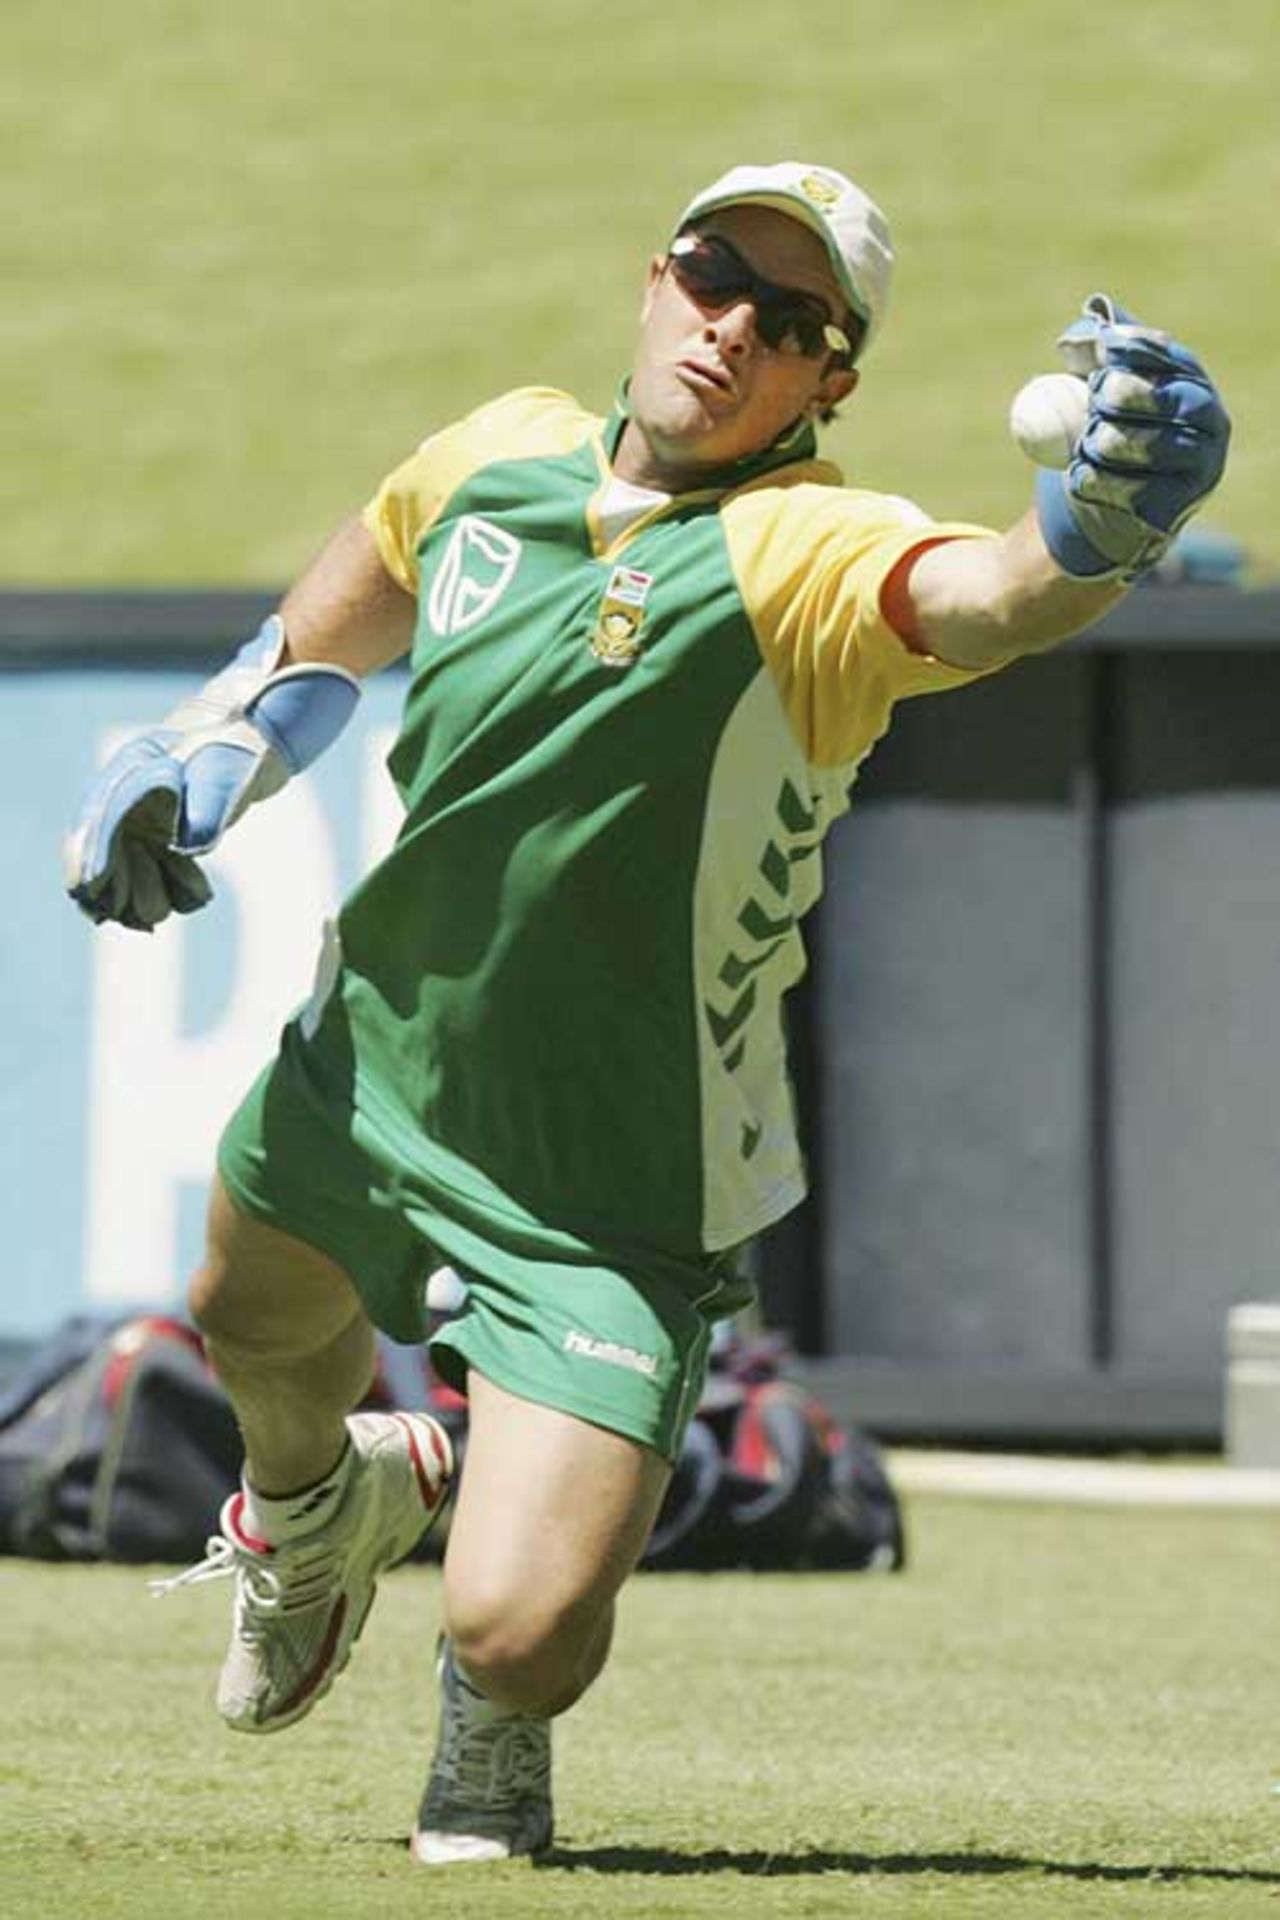 Mark Boucher dives for a catch during training ahead of the final ODI against Pakistan, Johannesburg, February 13, 2007